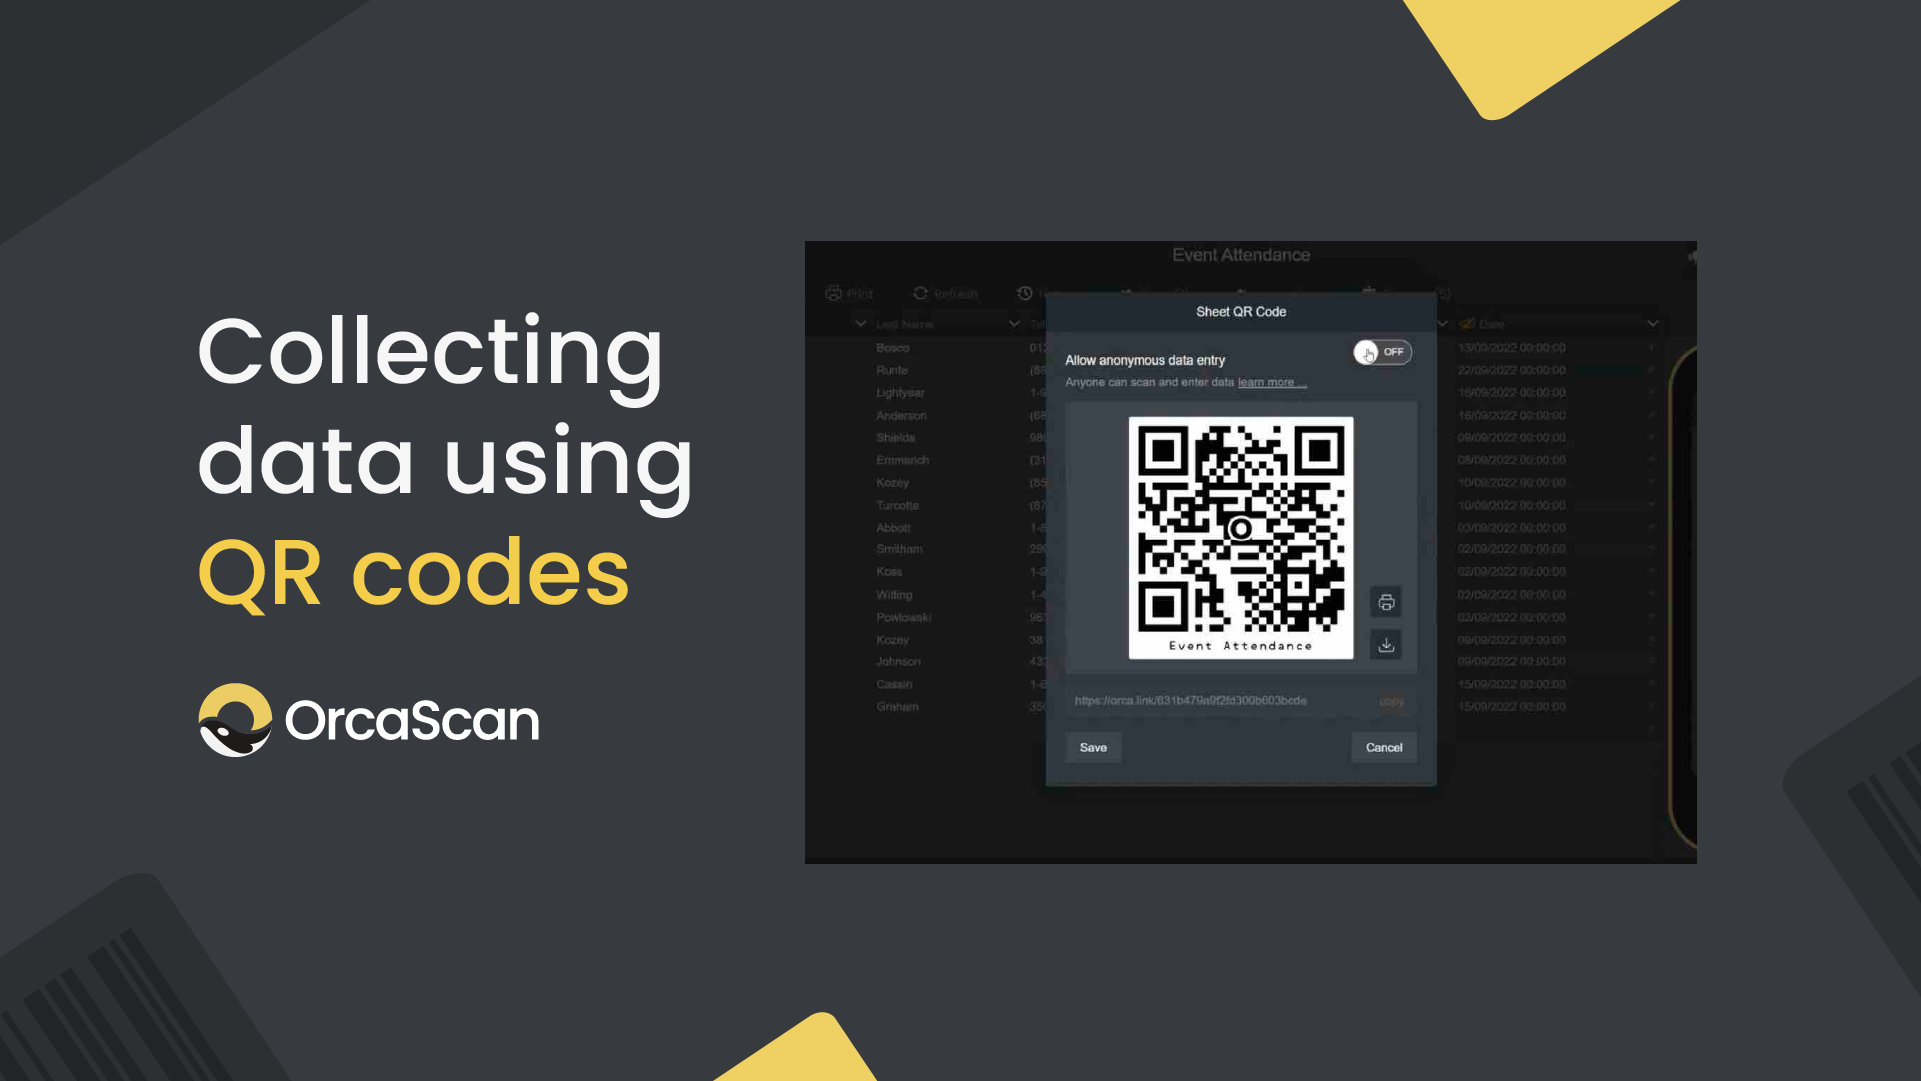 How to collect data using QR codes